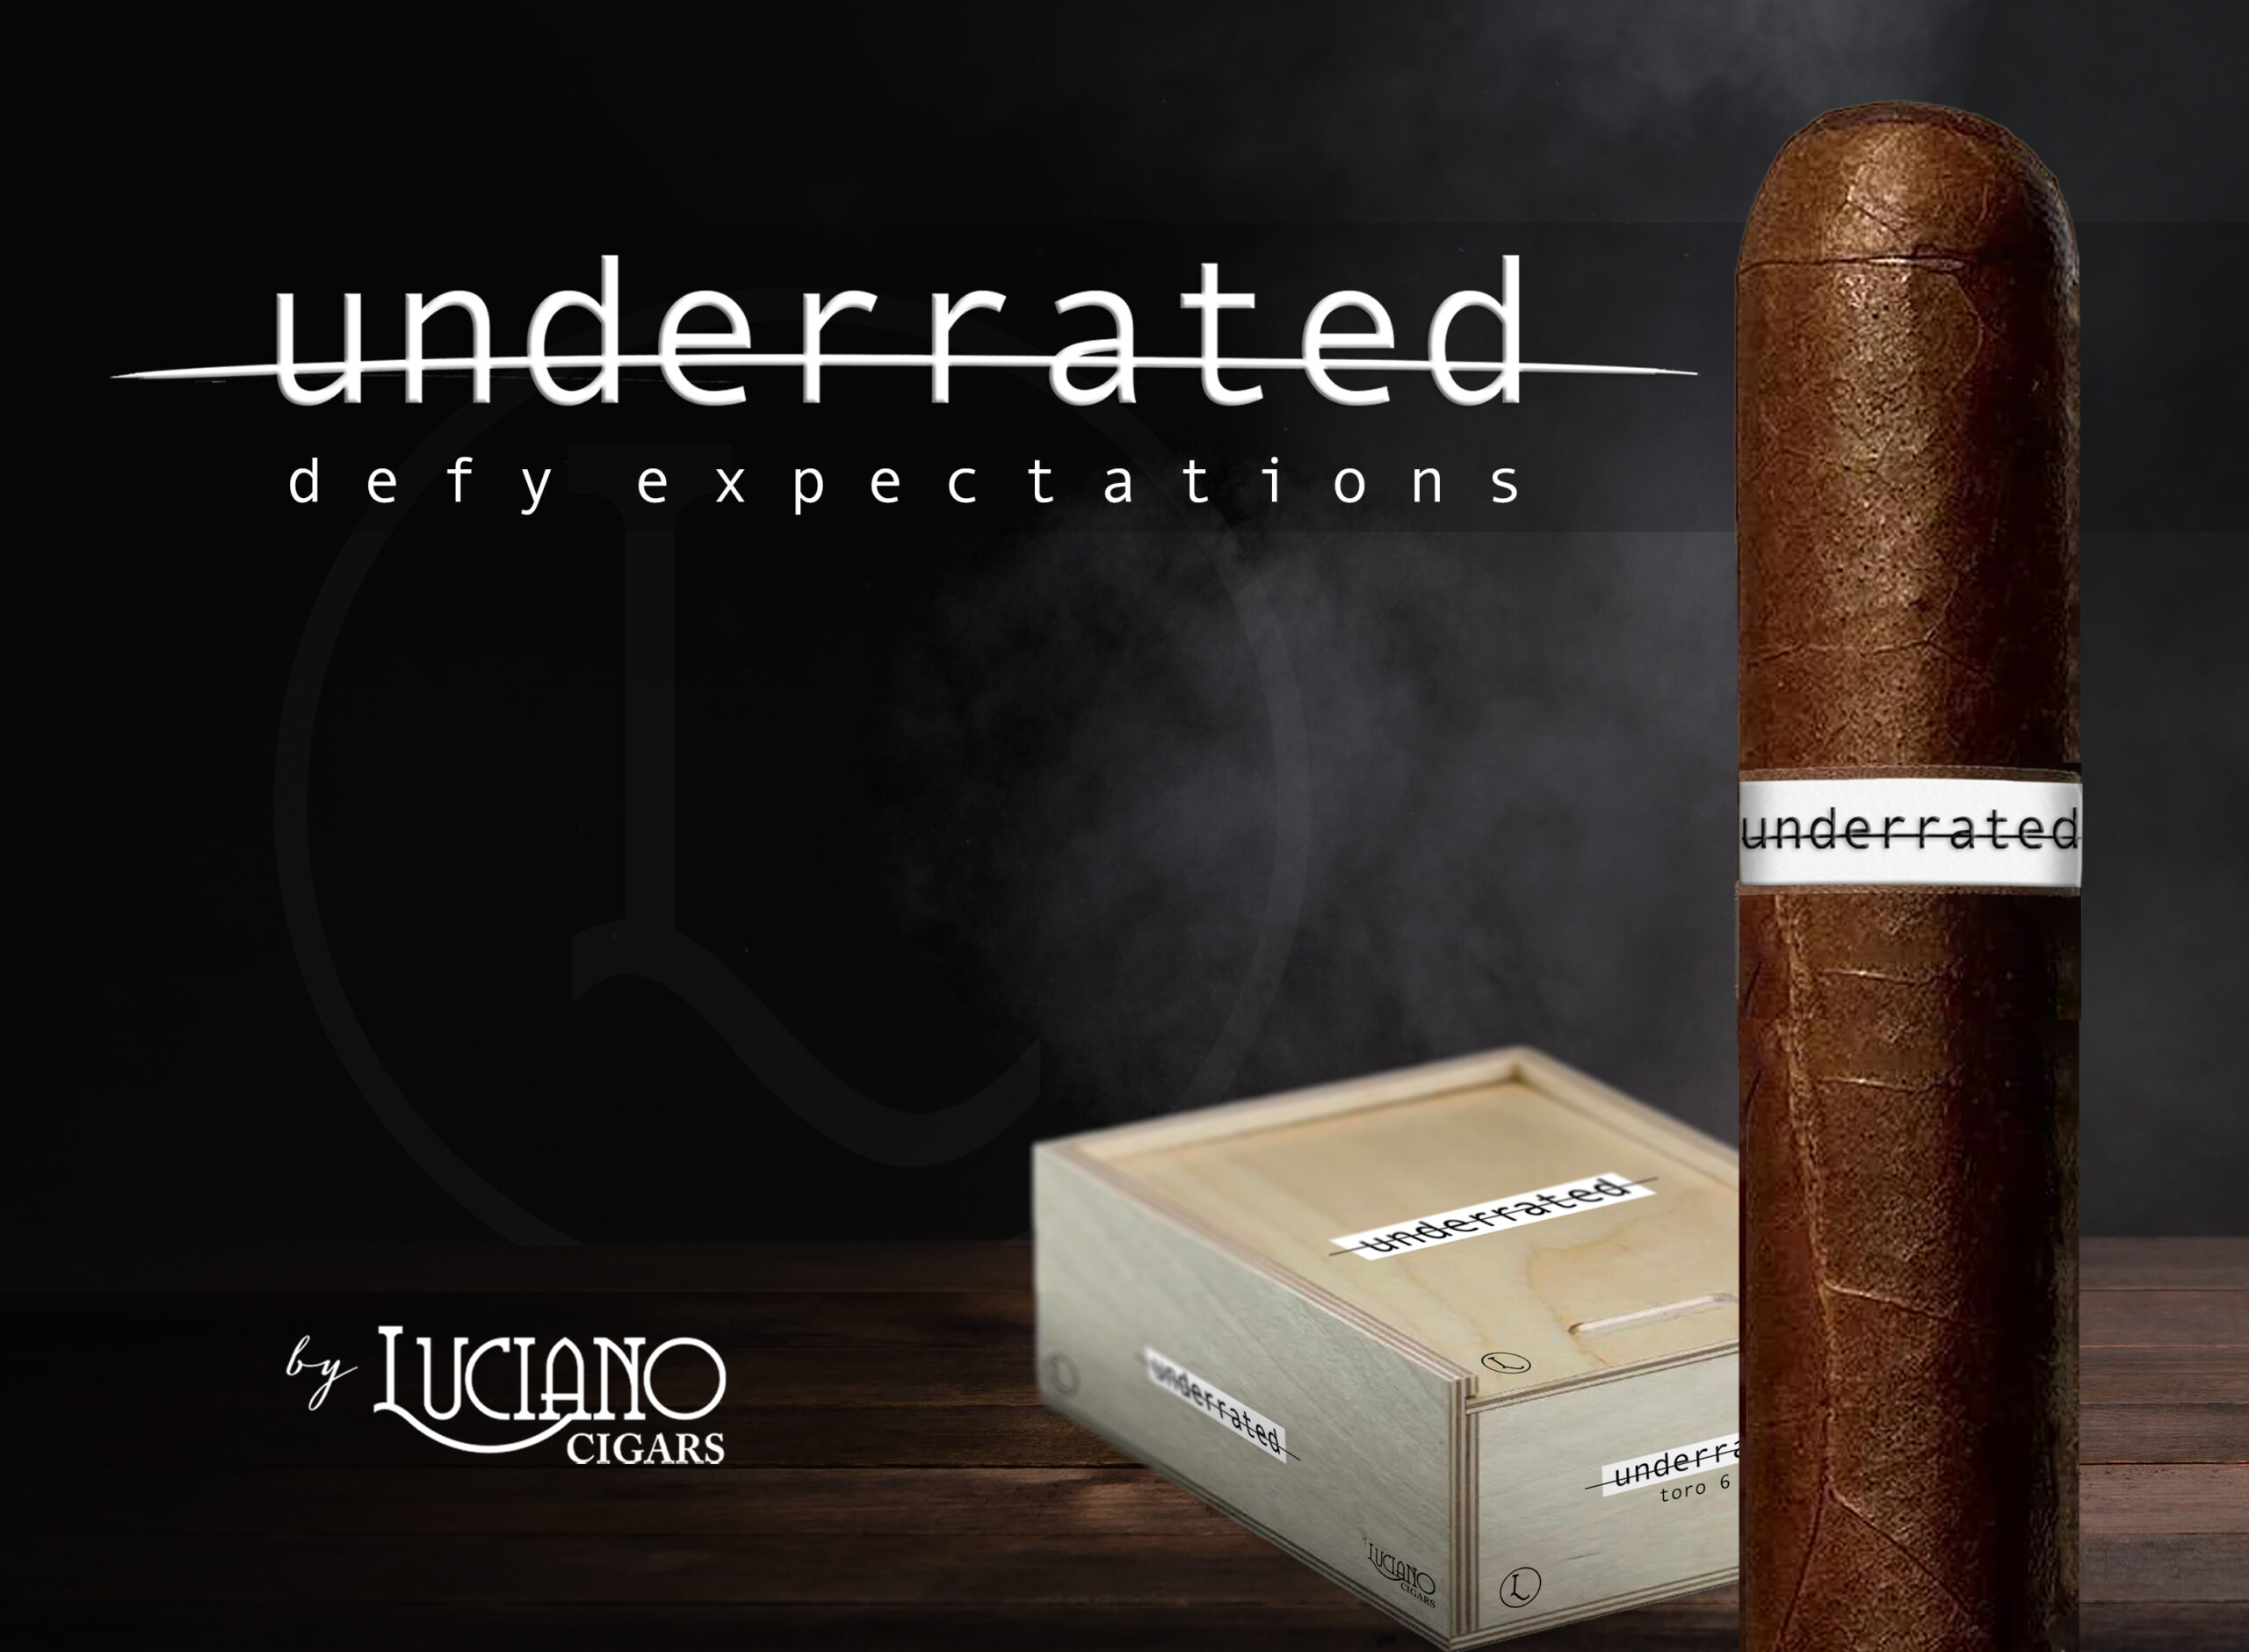 Luciano Cigars underrated cigar and box of cigars